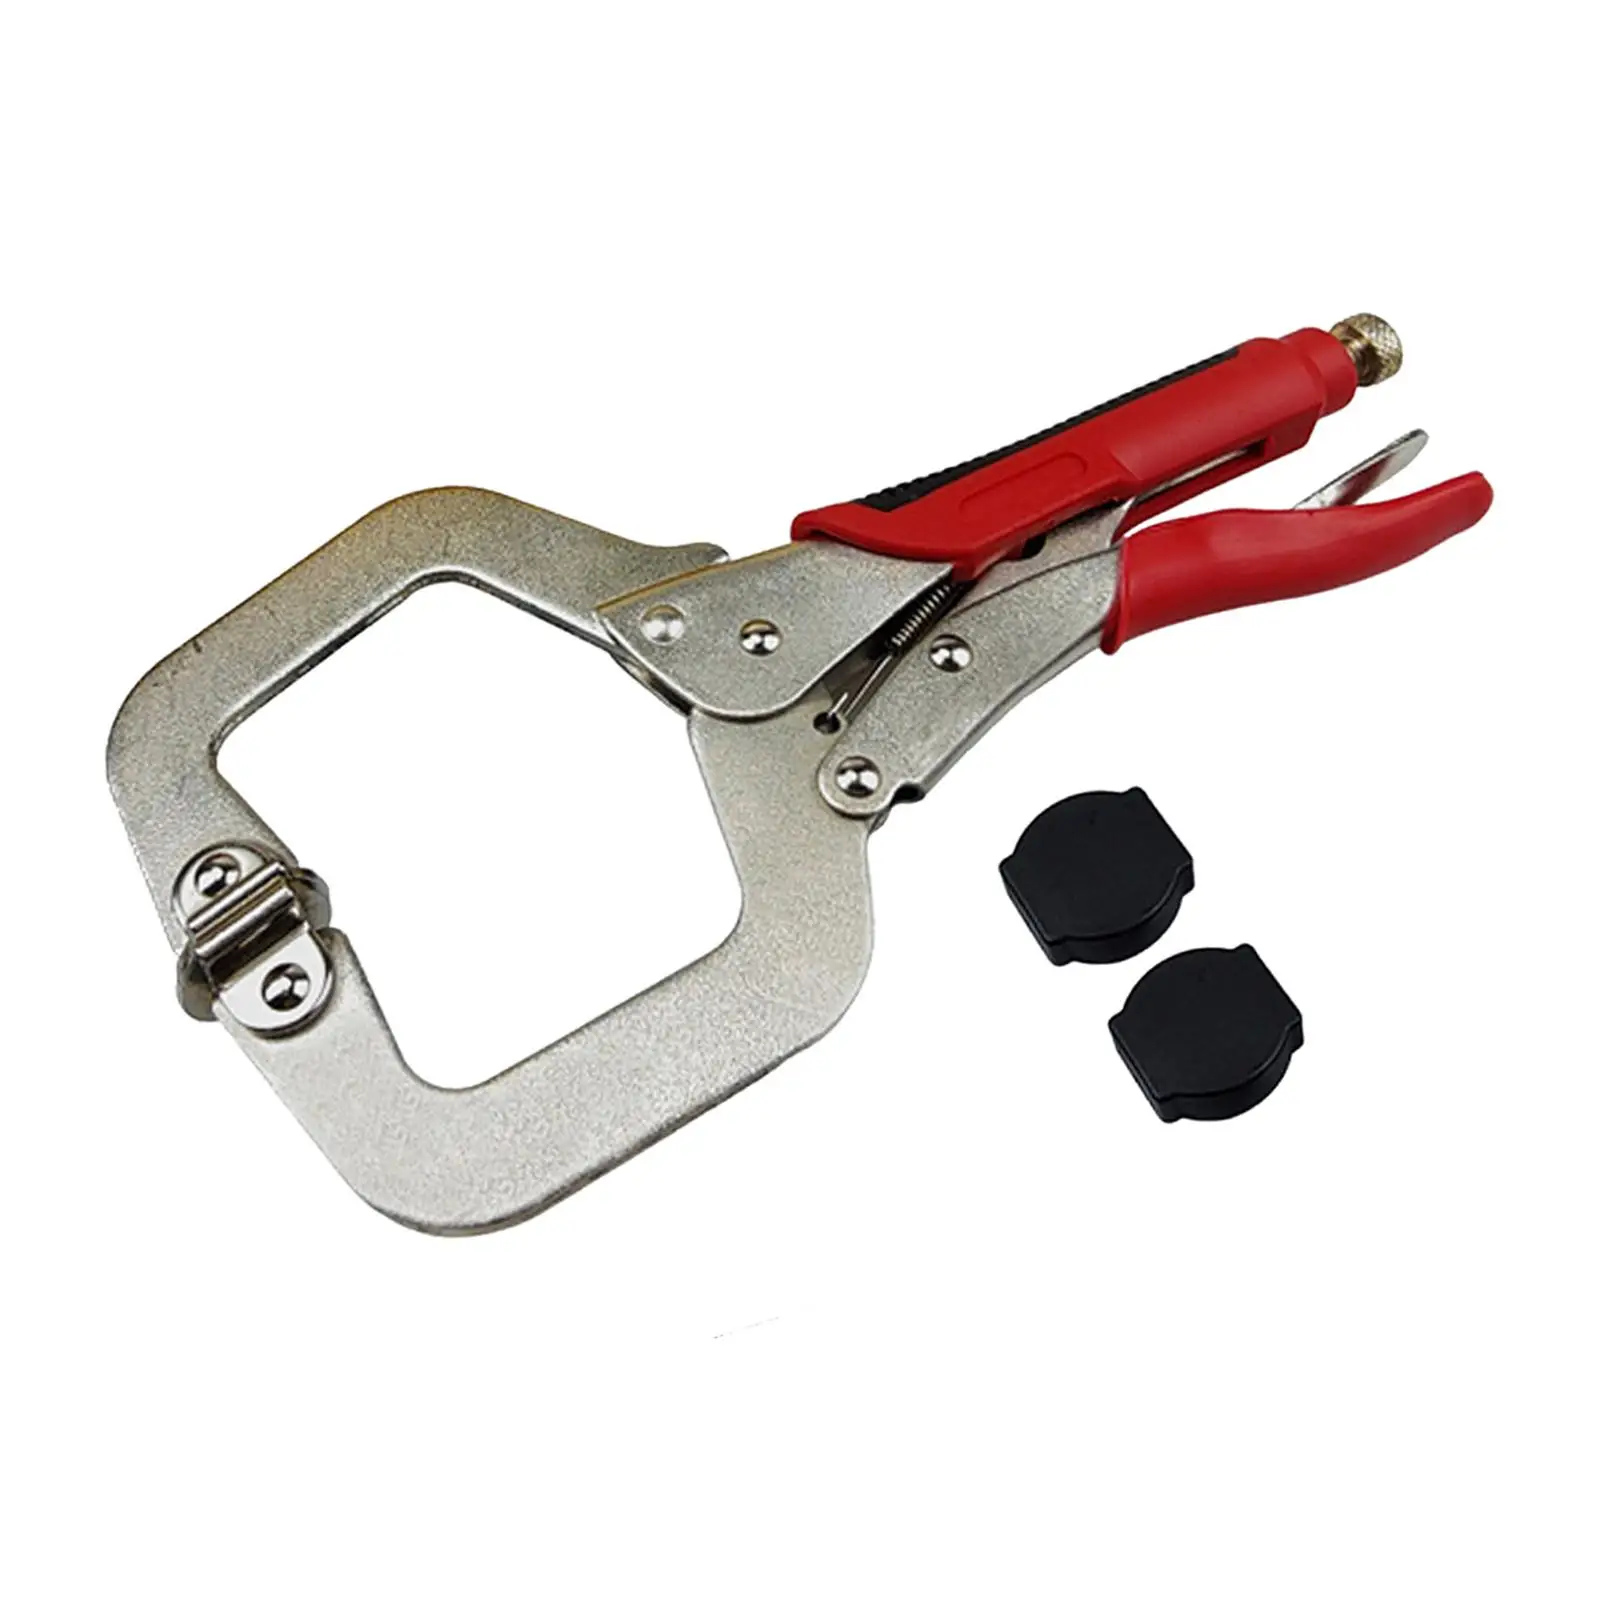 c style clamp Pocket Hole Joinery Welding vise grips Pliers Metal for Woodworkin